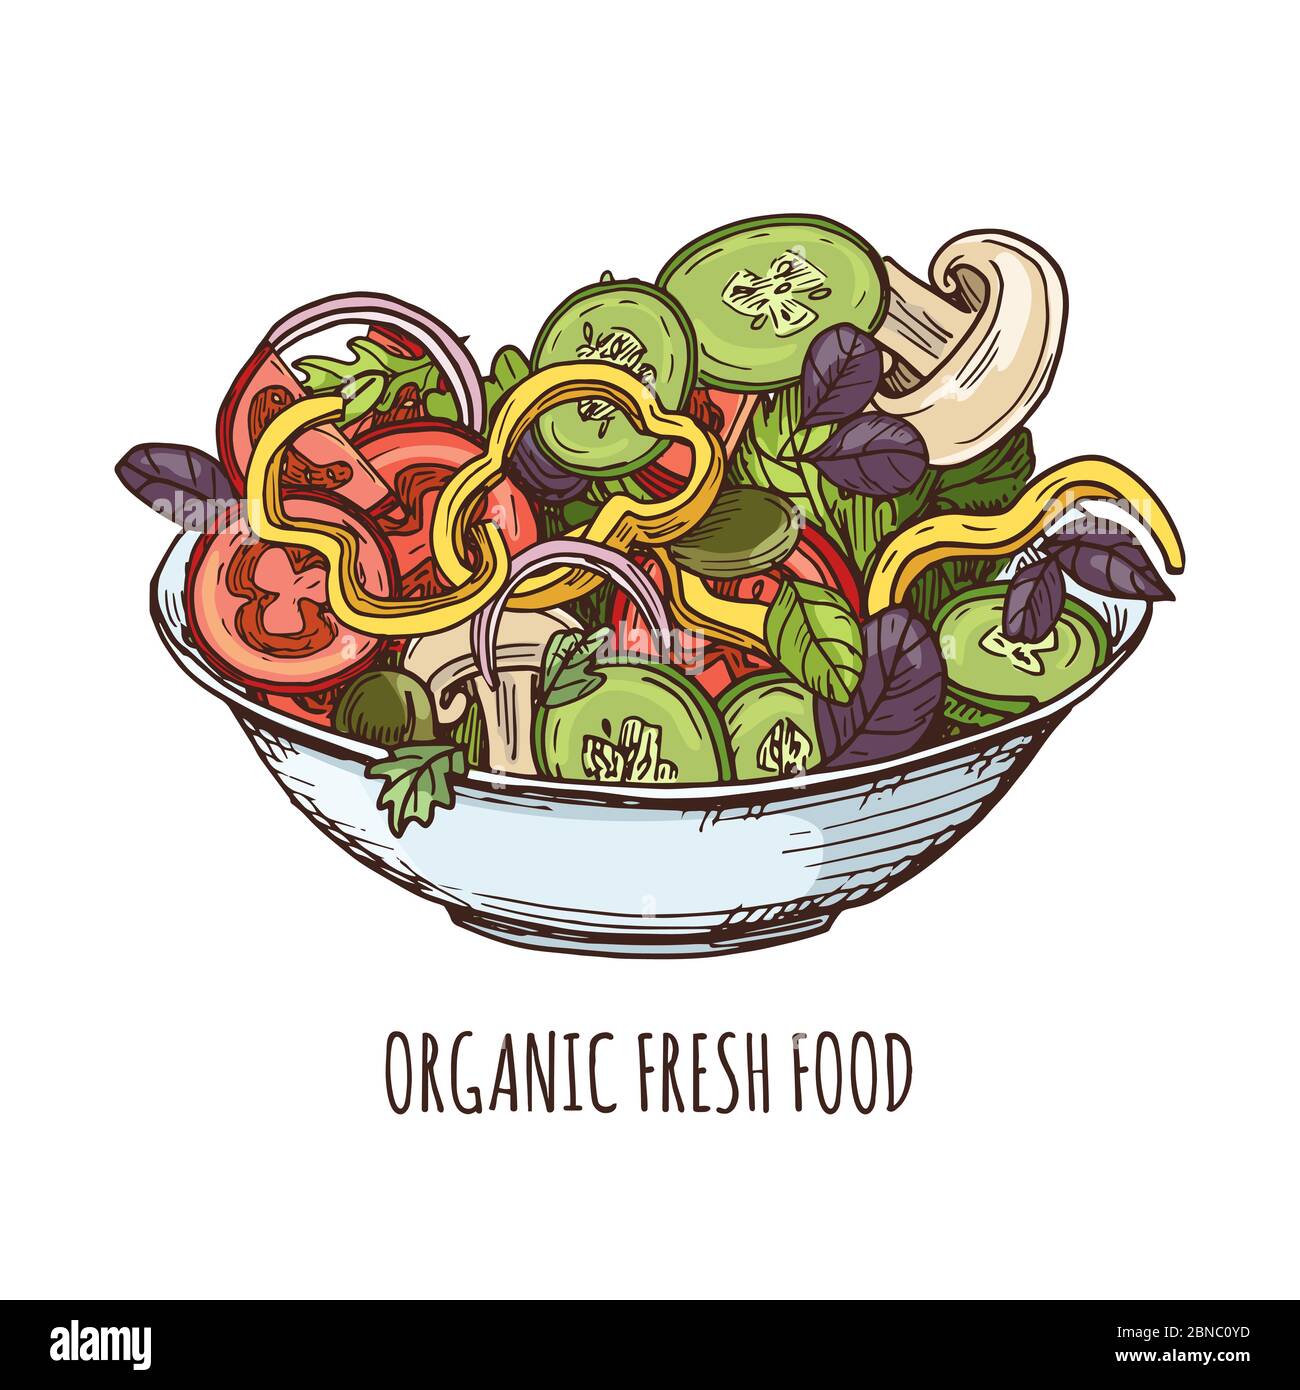 Organic fresh food illustration. Hand drawn greens salad in bowl isolated on white background vector Stock Vector